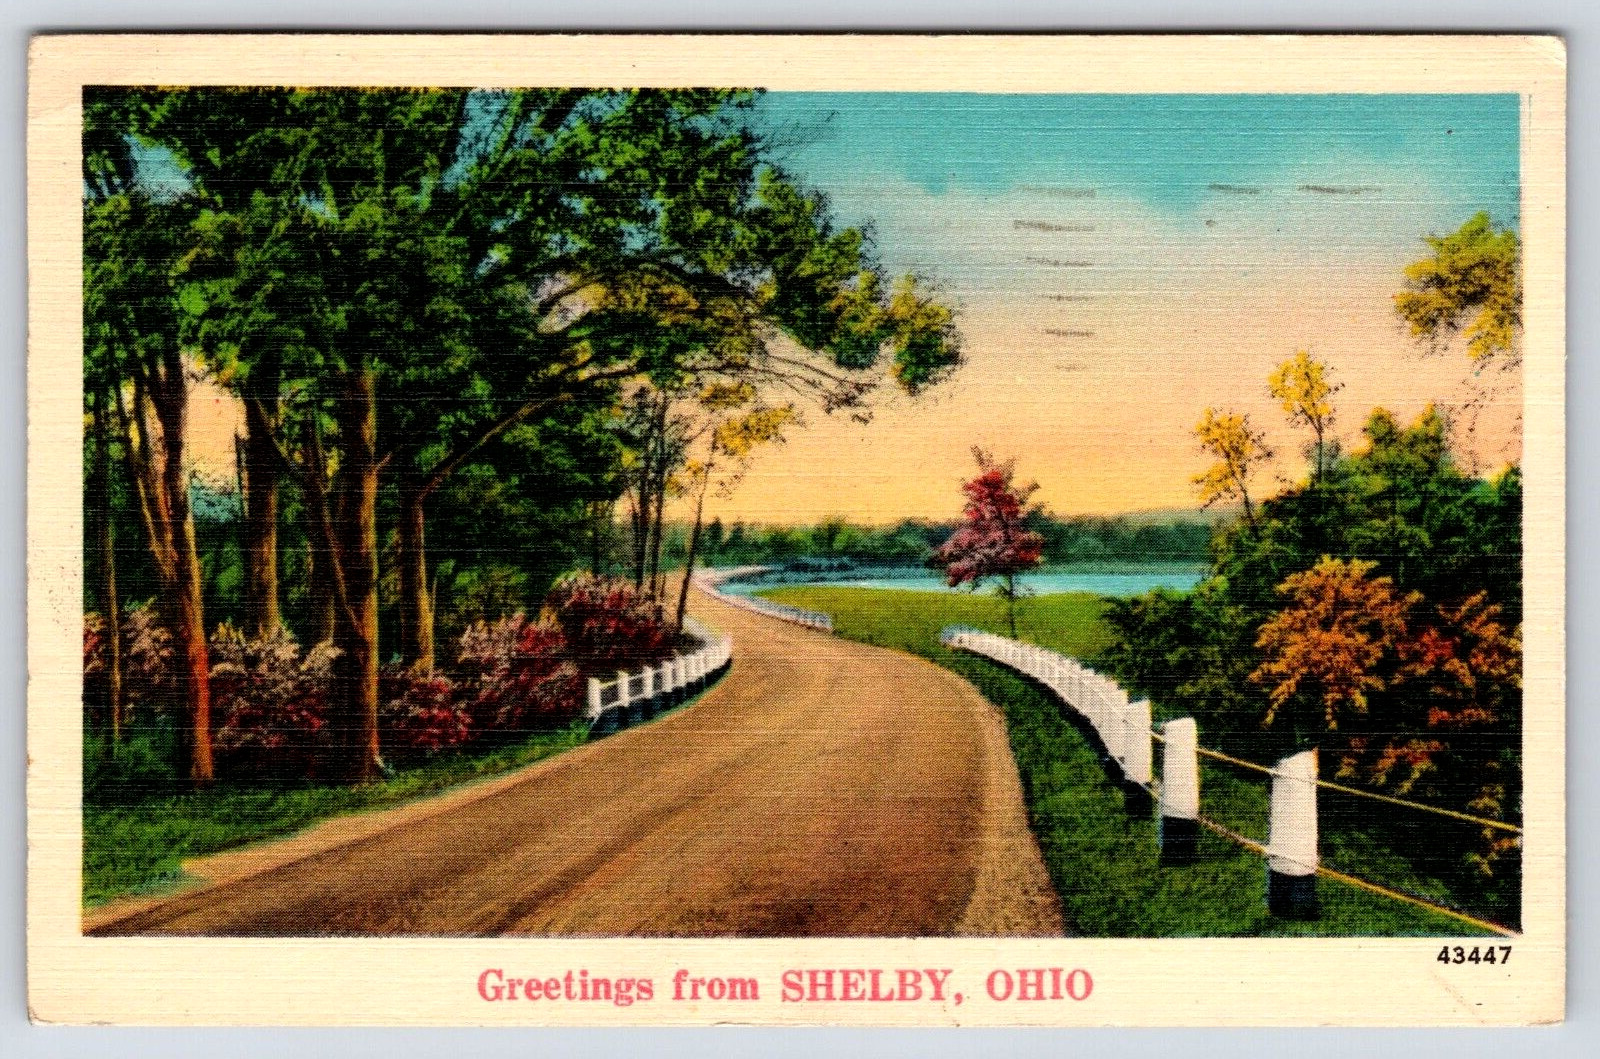 Shelby OH-Ohio, Greetings, Landscape, Road, Antique, Vintage 1941 Post Card